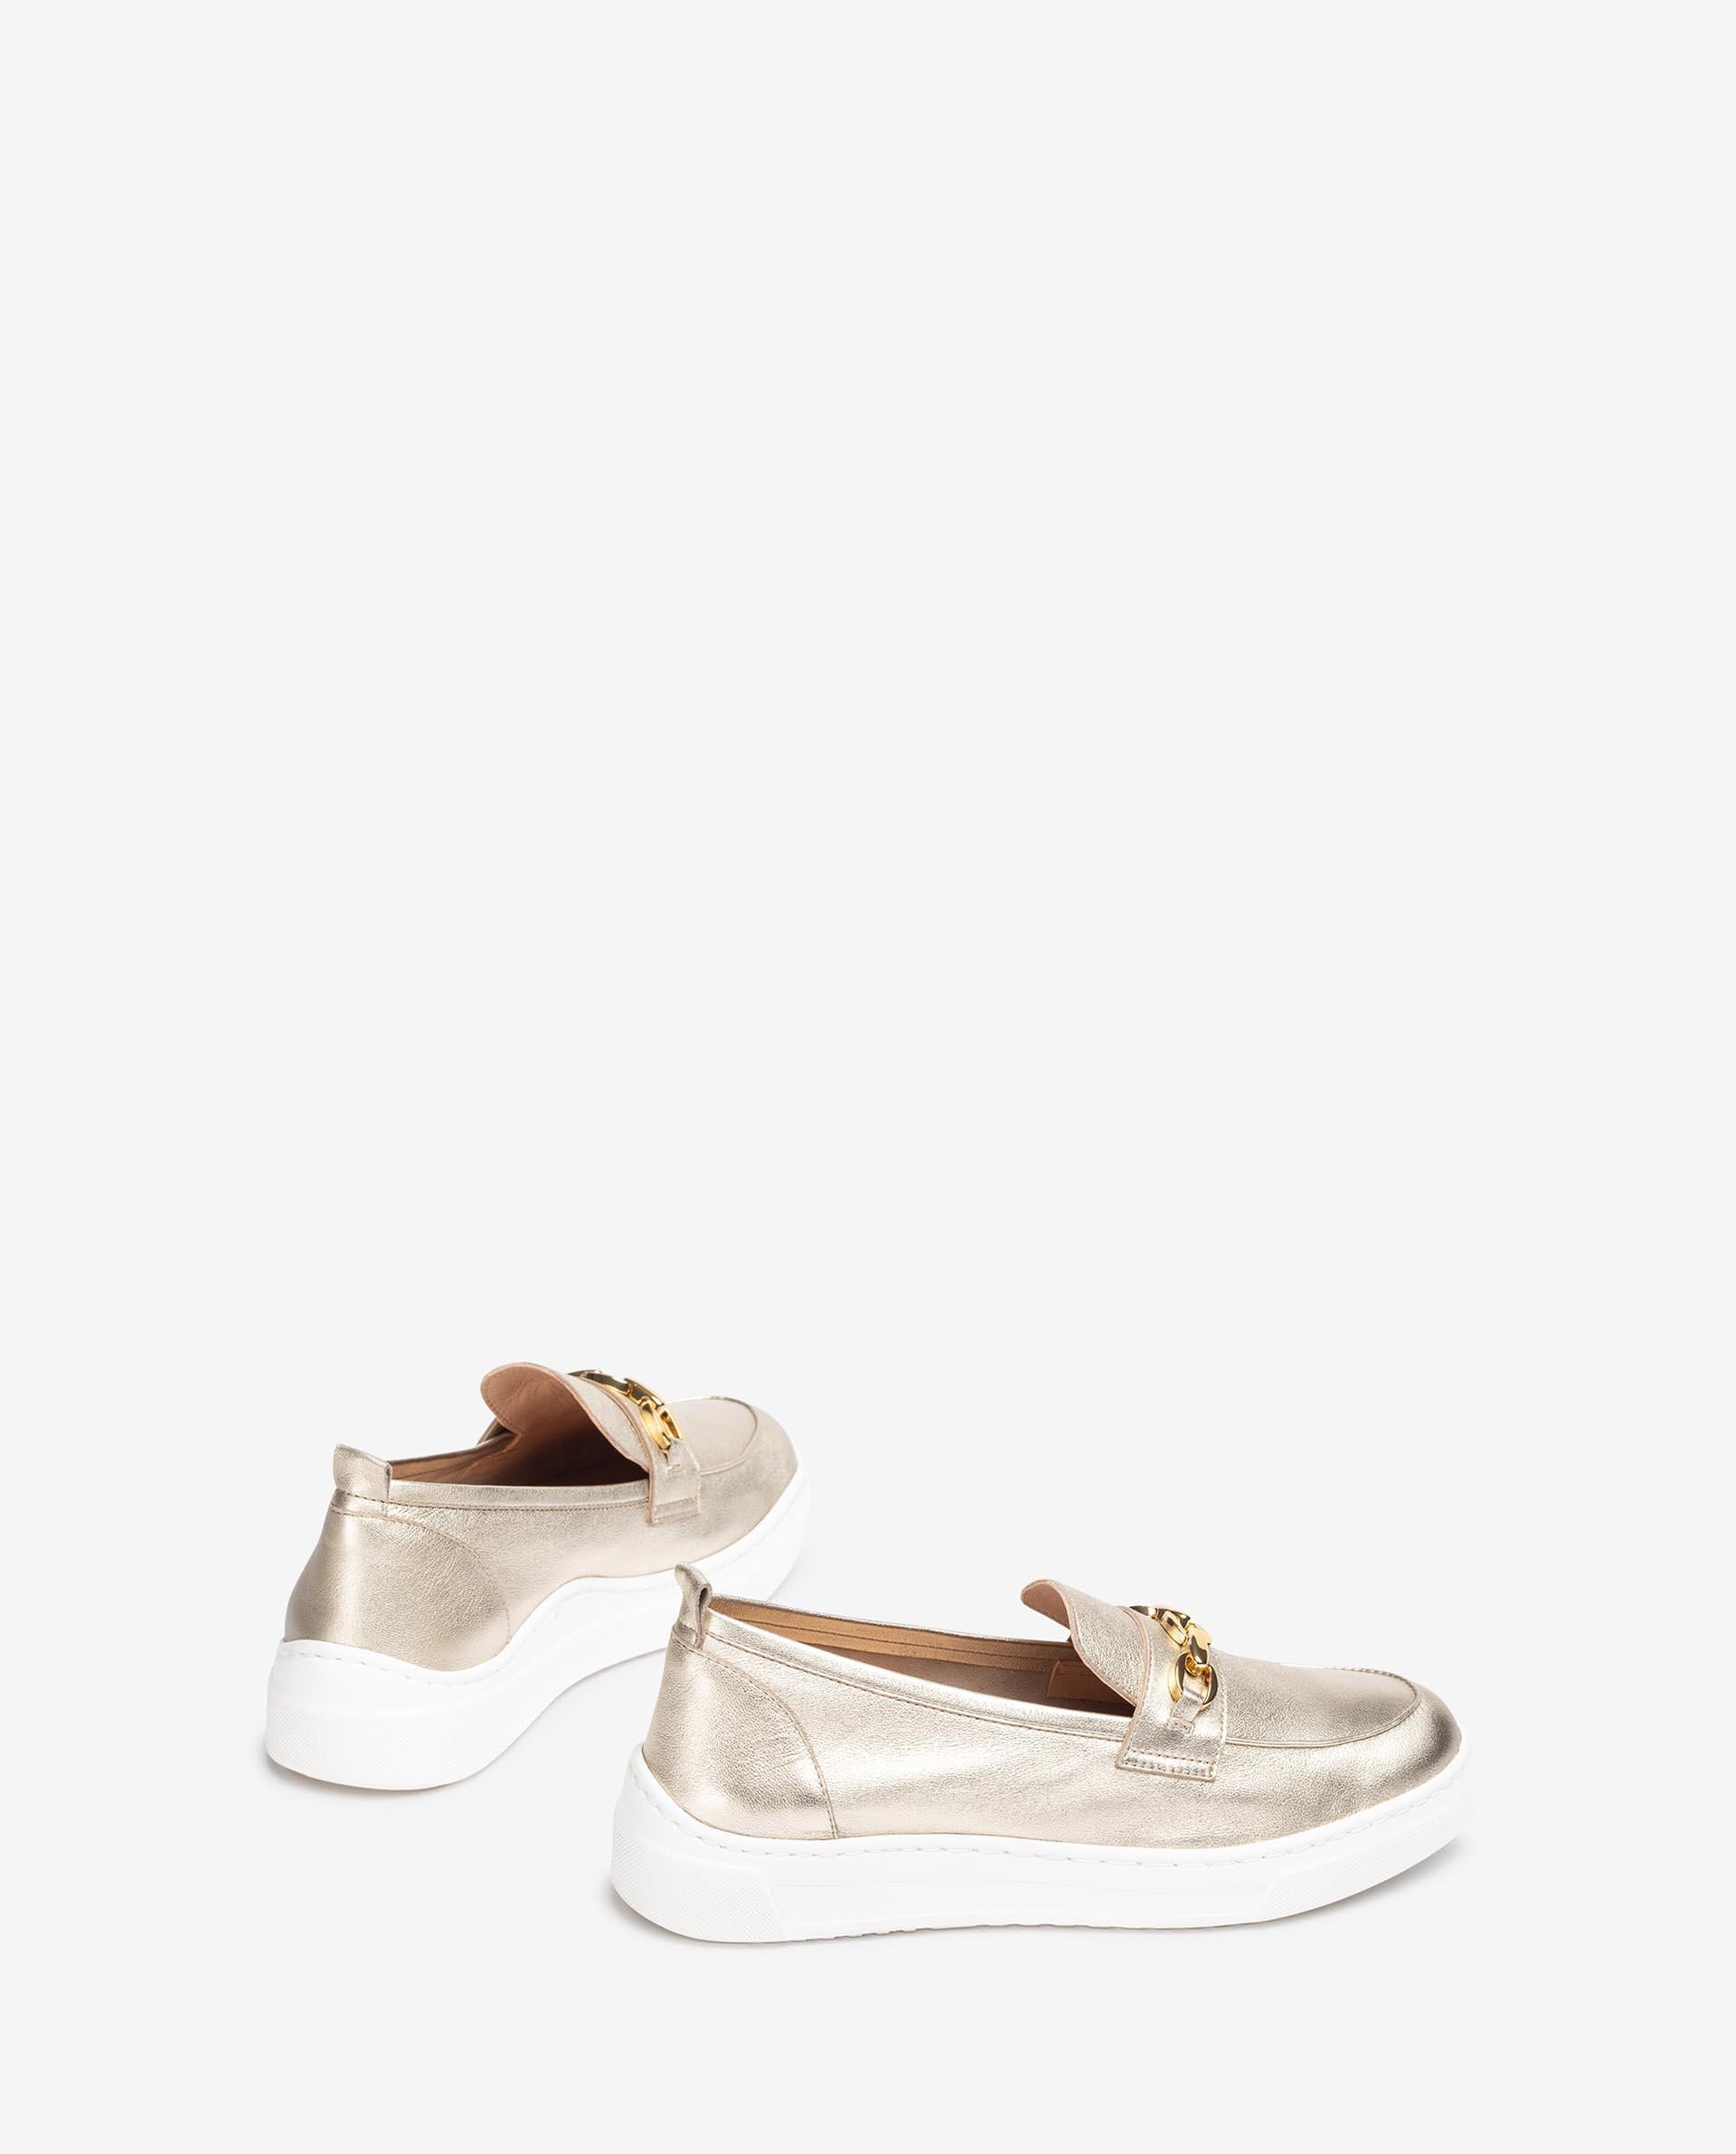 Side view showing the sporty white rubber sole of the Unisa FINDAY Metallic Loafer.